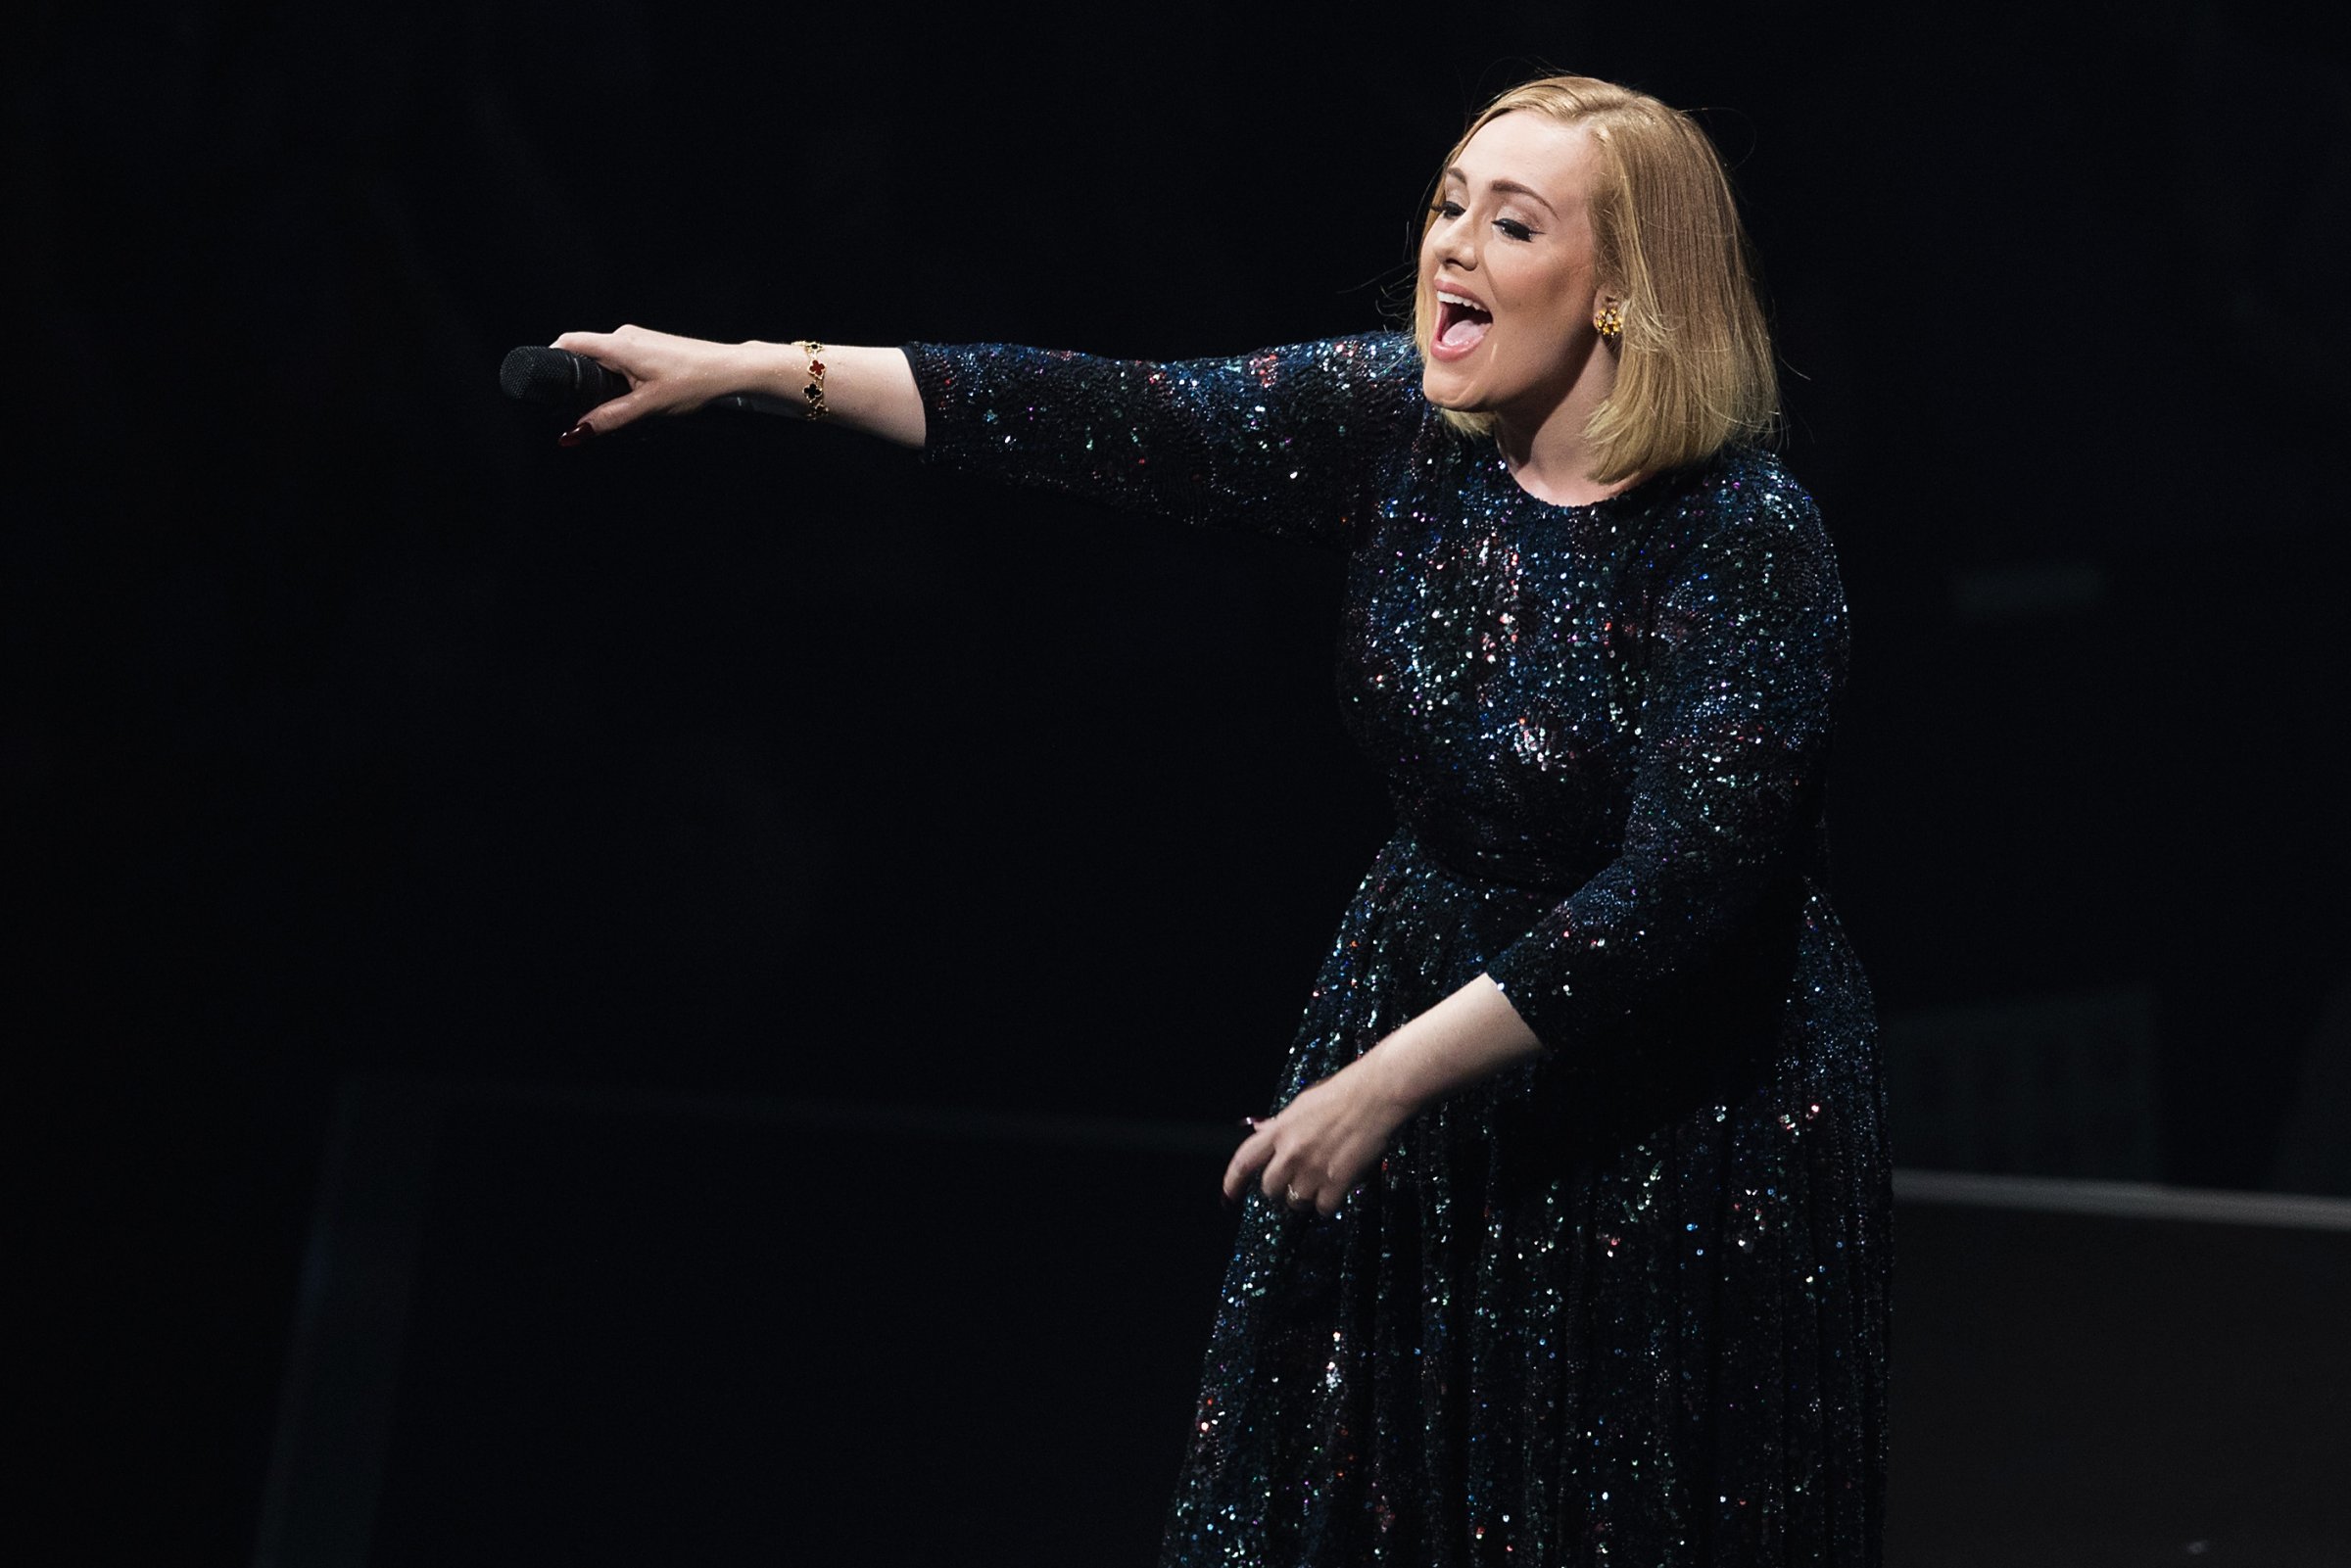 Singer Adele performs on stage during her North American tour at KeyArena on July 25, 2016 in Seattle, Washington.